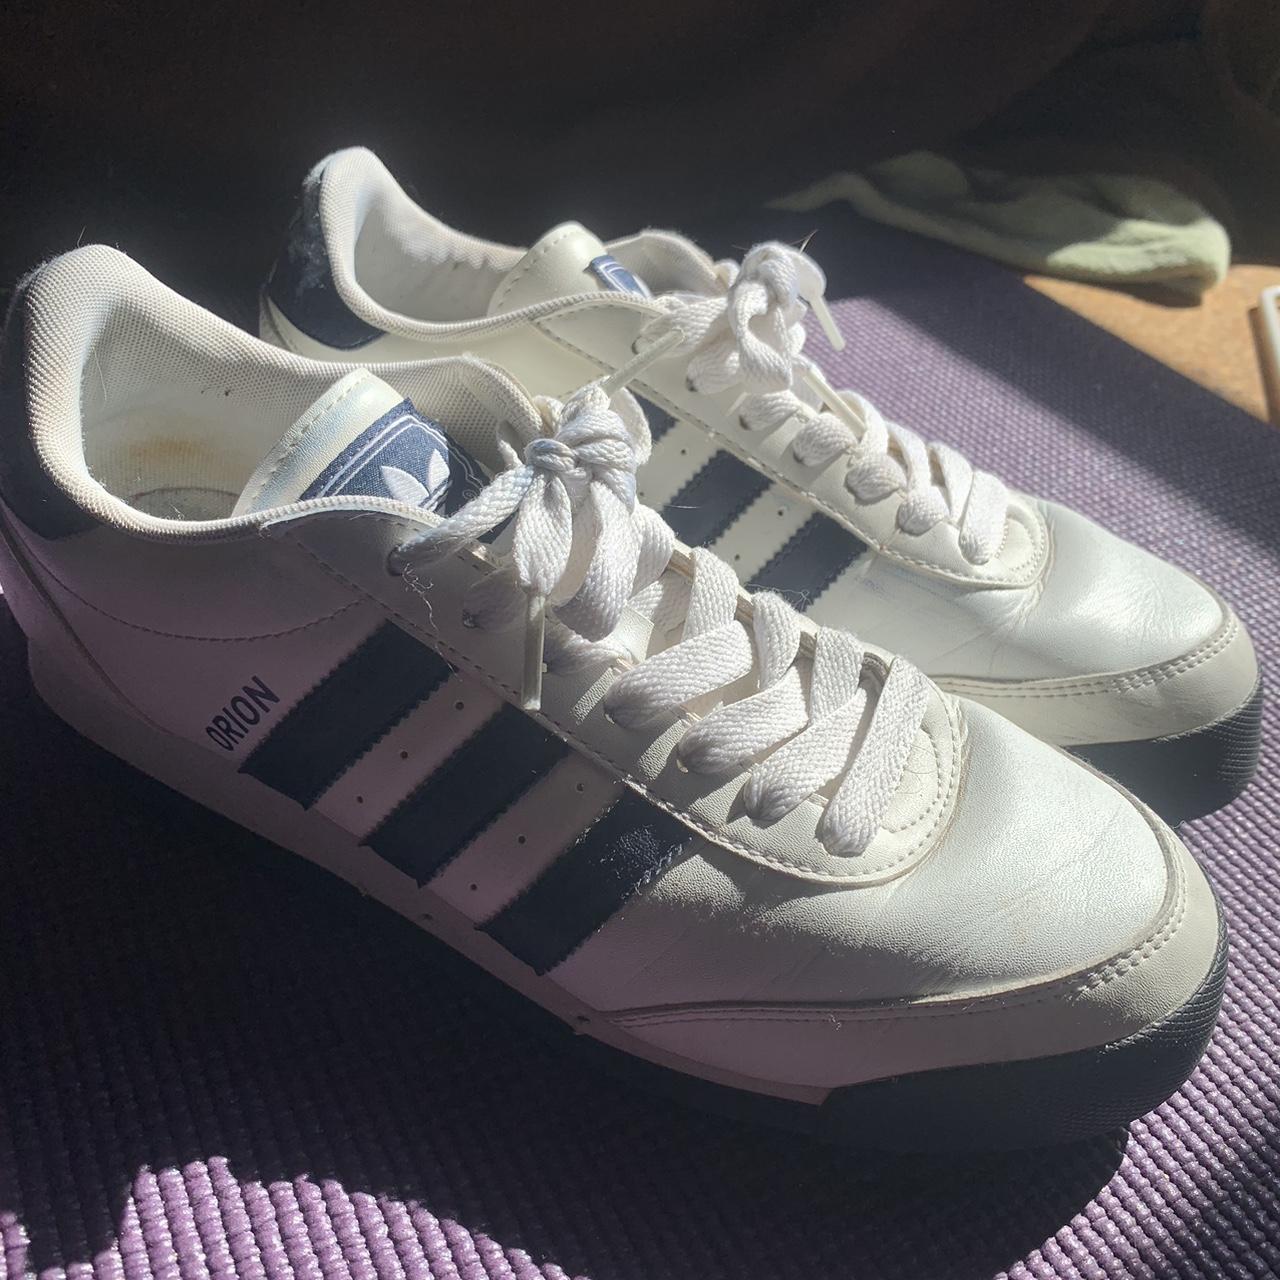 Adidas Men's Navy and White Trainers